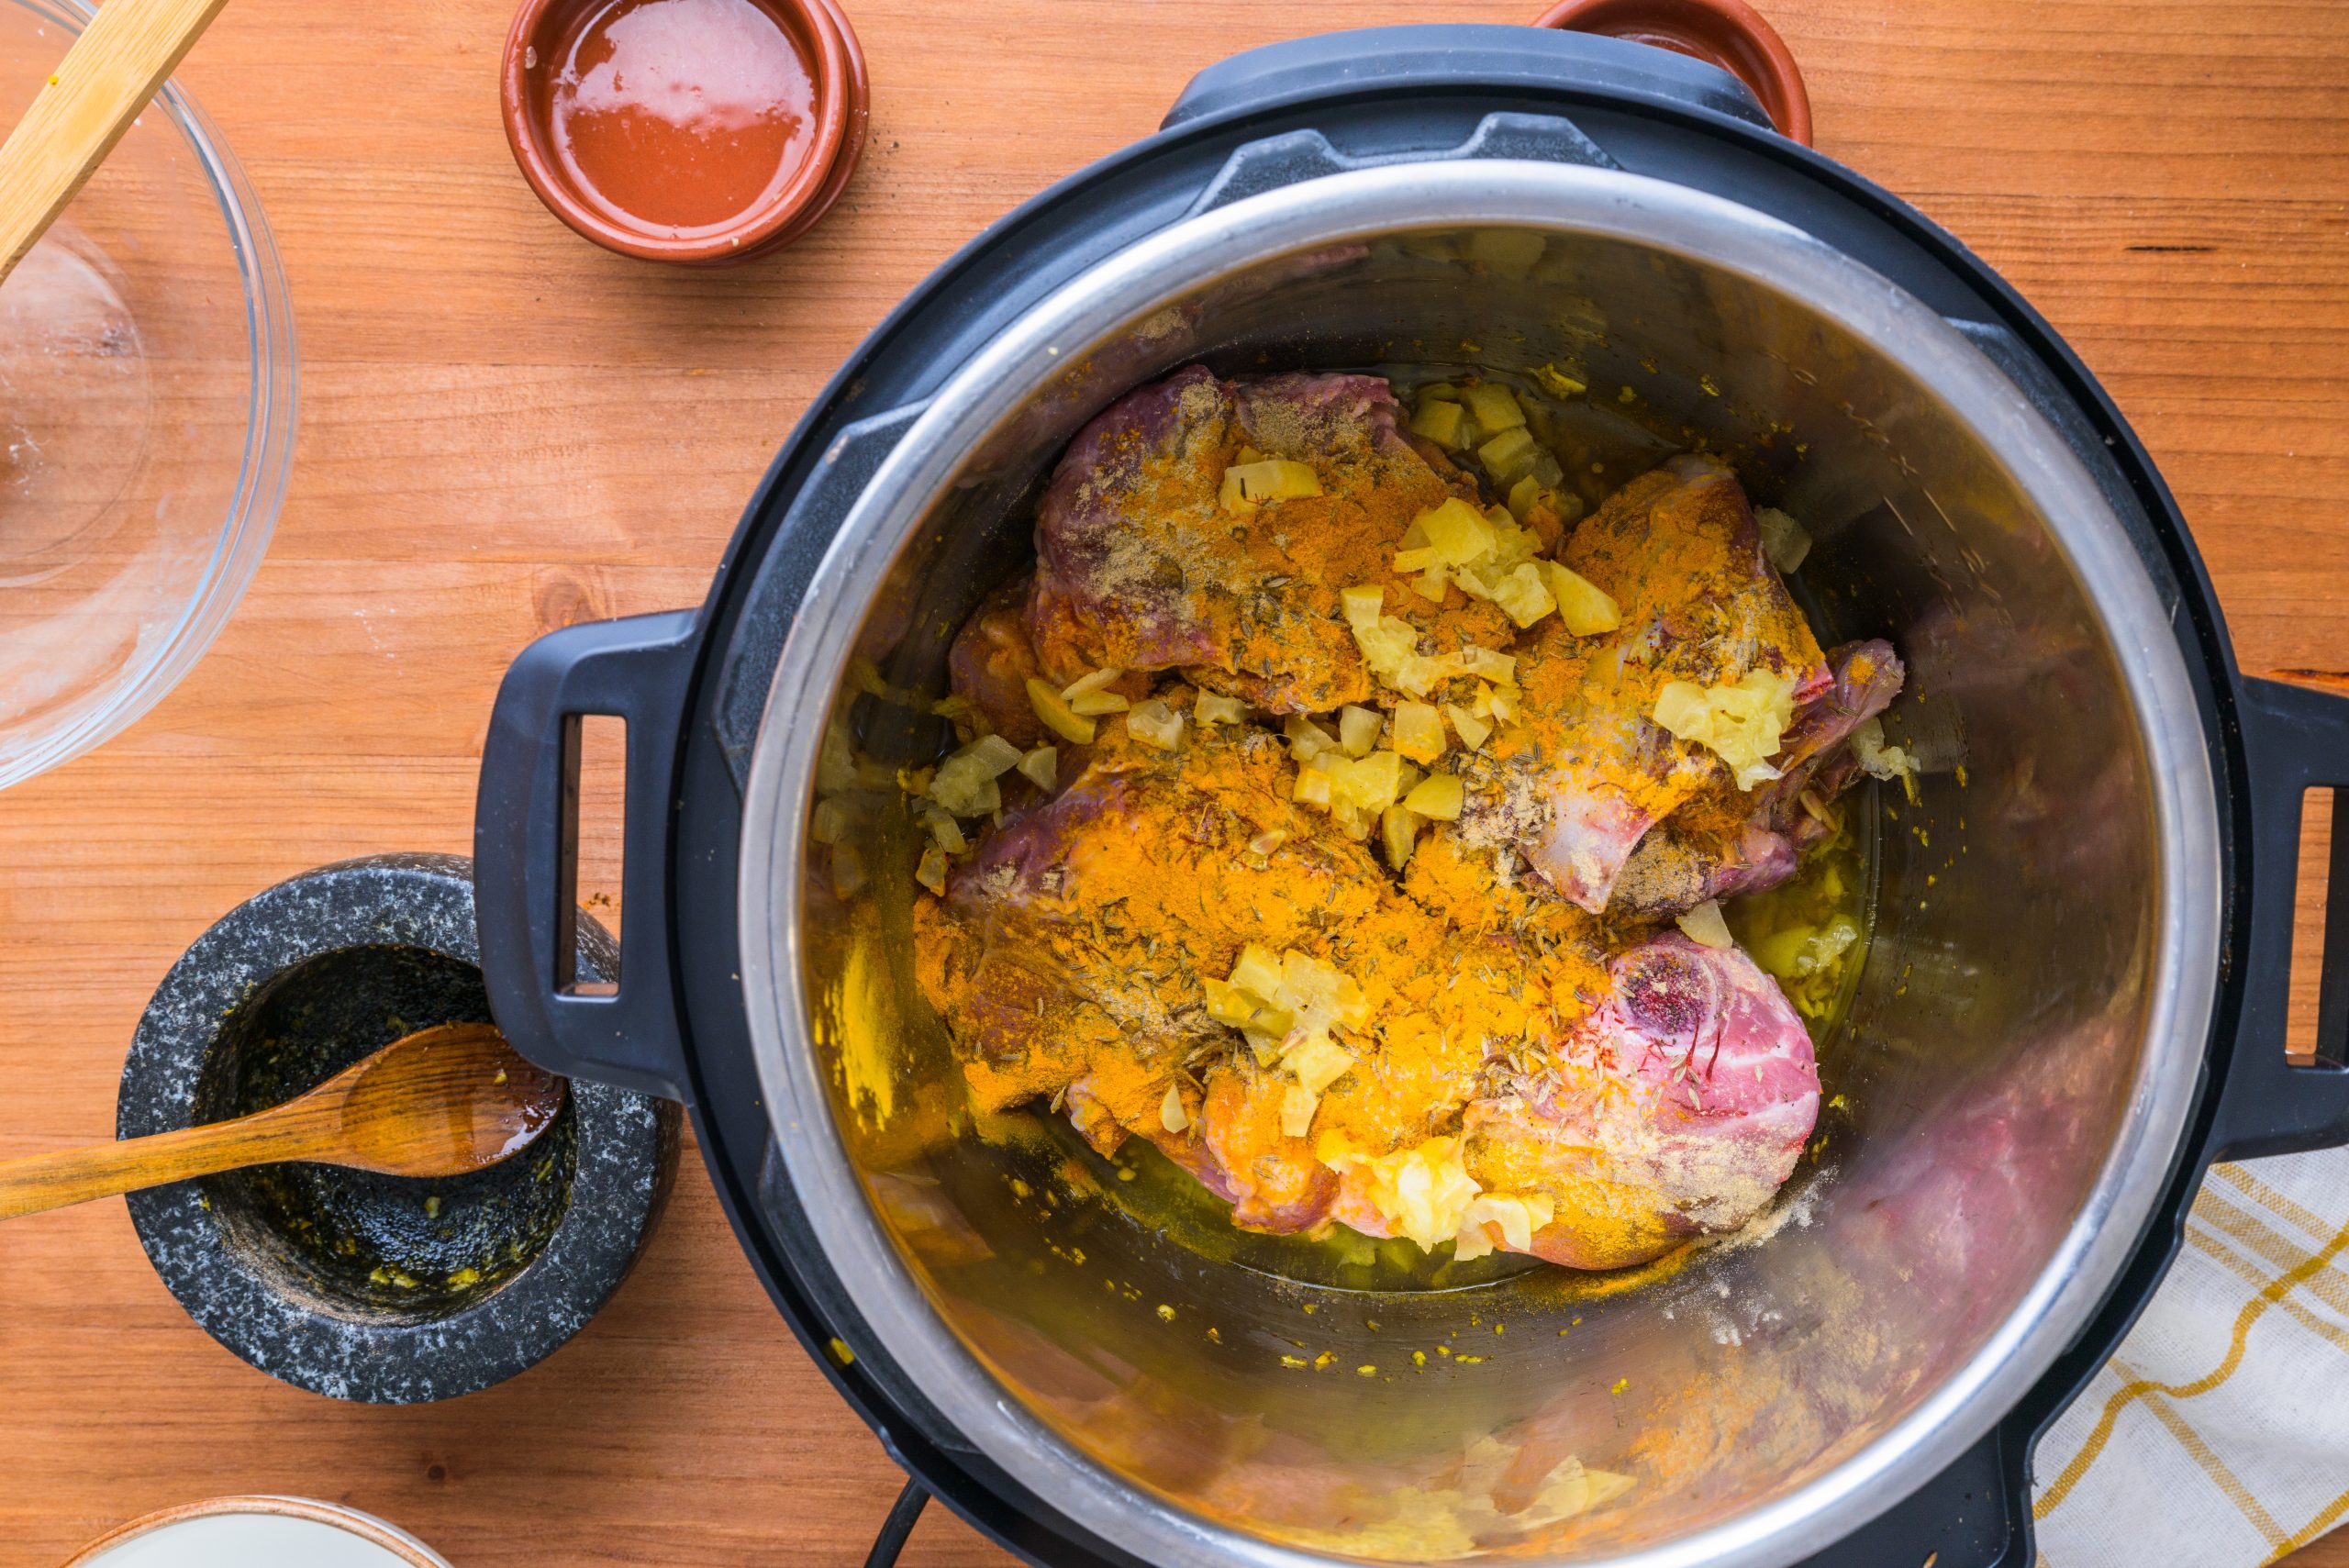 The meat is mixed in with spices in a slow cooker for the Marrakechi Tangia recipe